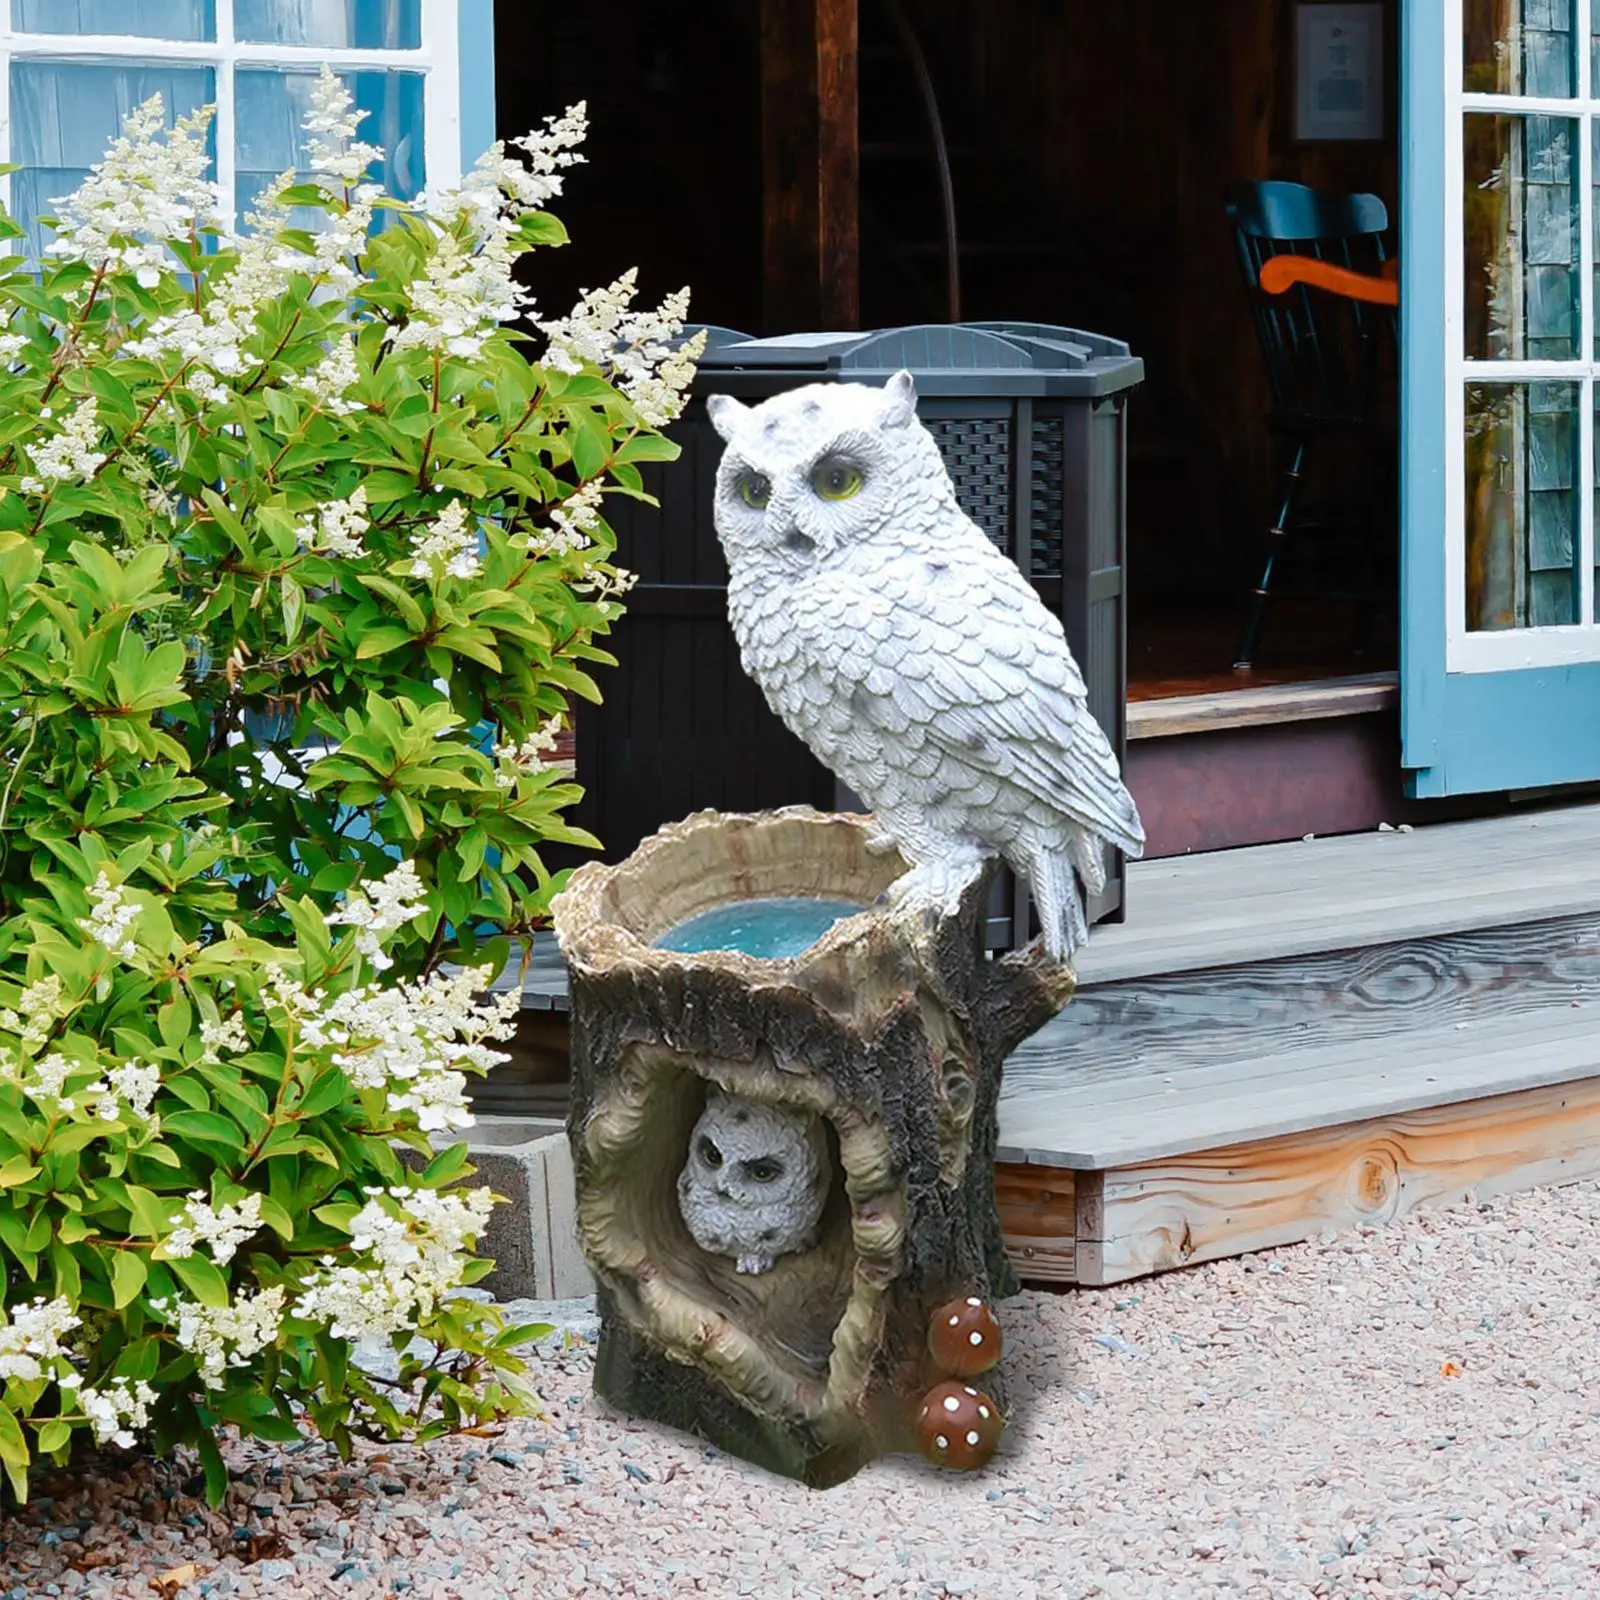 

Owl Statue Solar Light Decoration Housewarming Gift Resin Lawn Ornaments for Backyard Patio Indoor Outdoor Landscape